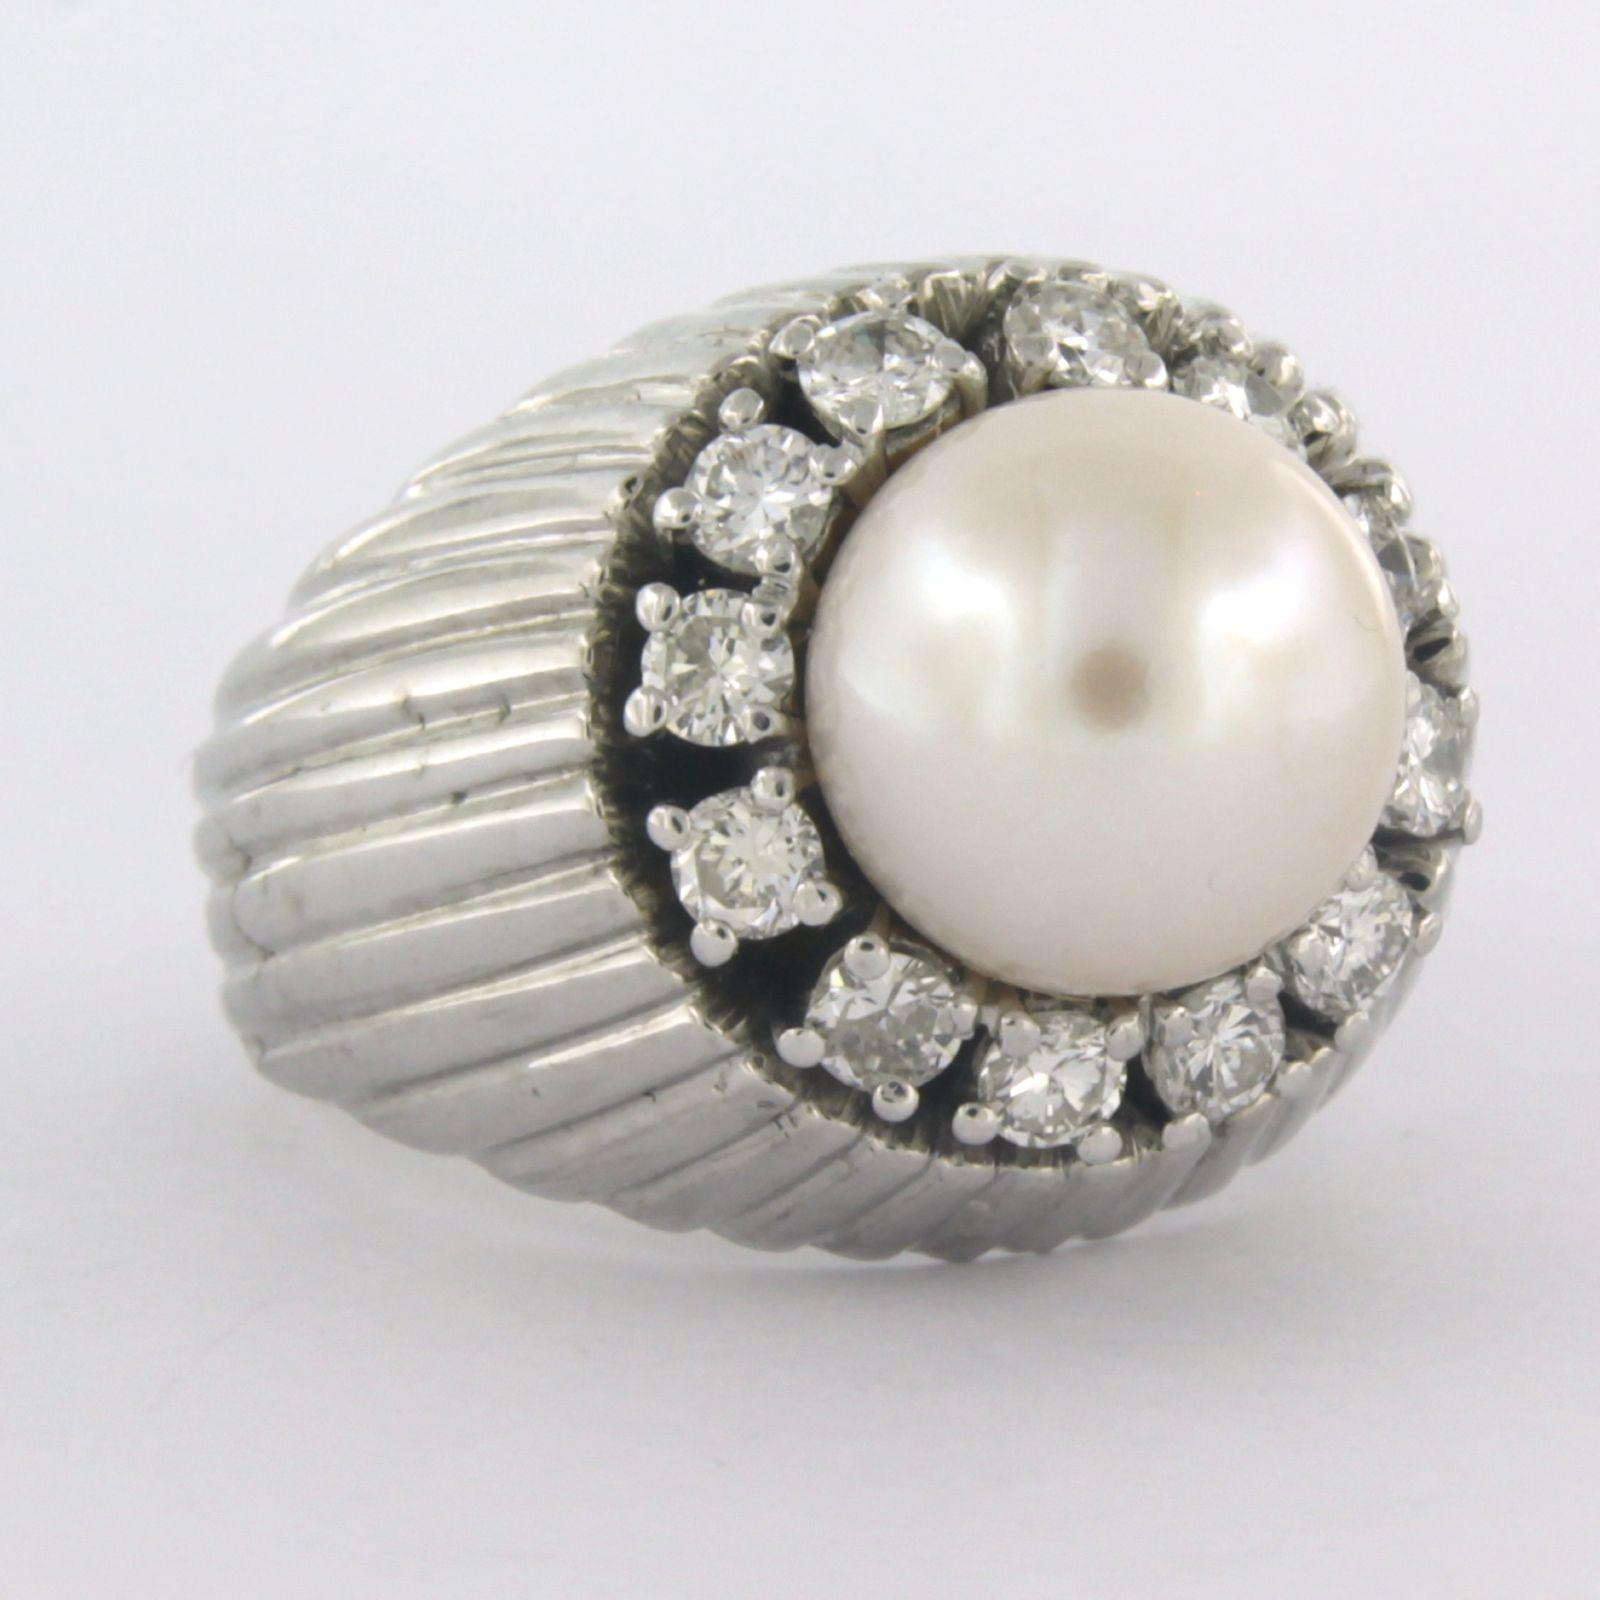 18 kt white gold ring set with pearl ​​and brilliant cut diamond 0.50 ct F/G SI - ring size 54

detailed description

The top of the ring is 1.7 cm wide and 1.5 cm high

weight 14.5 grams

ring size 54, the ring can be enlarged or reduced a few